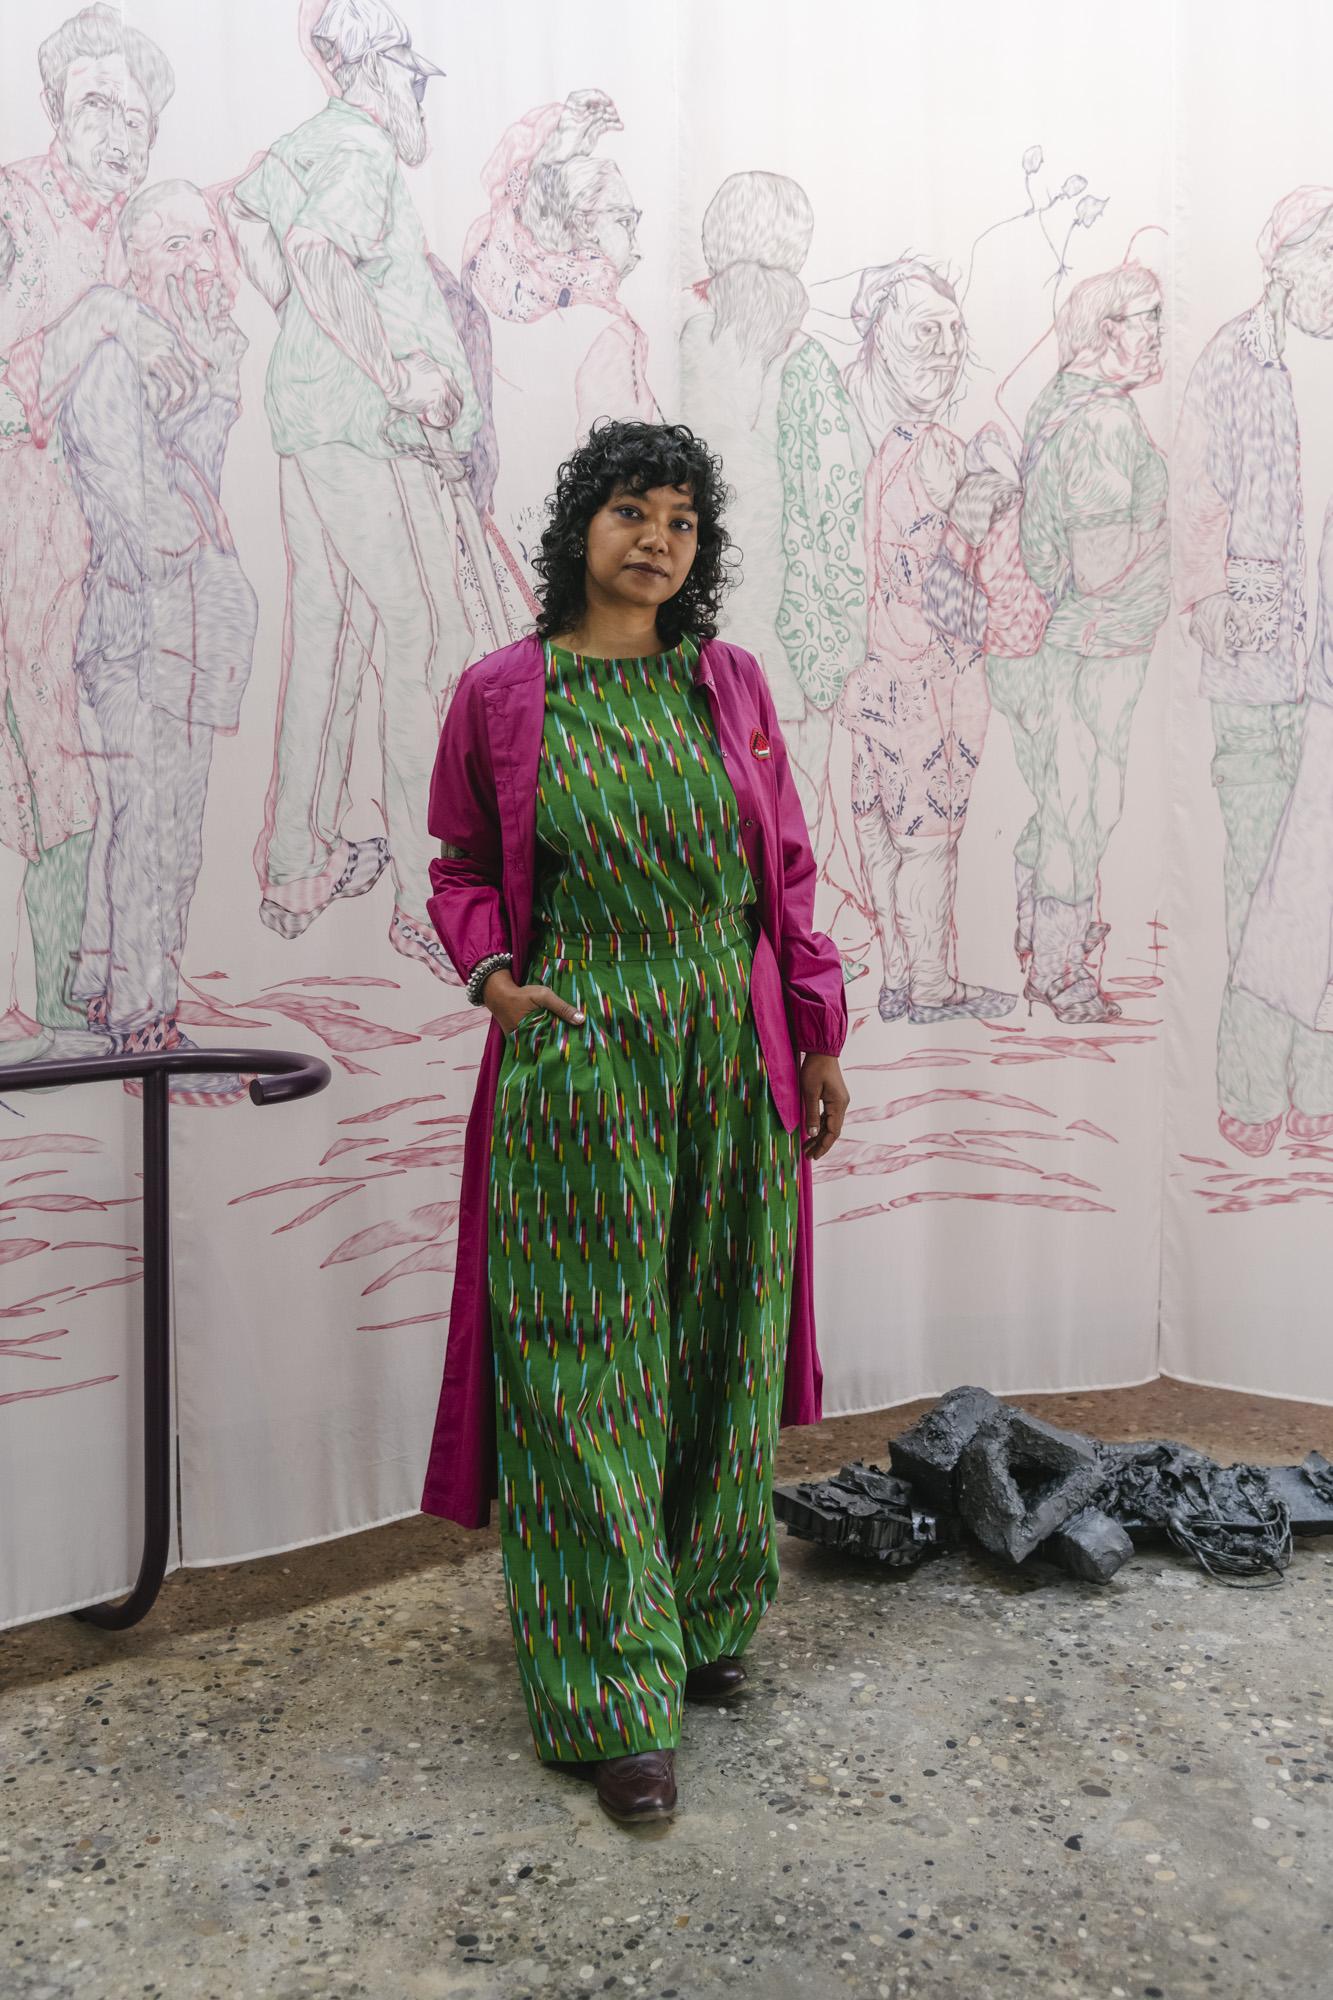 Artist Vidha Saumya standing in front of a large drawing depicting people standing in line. Vidha is wearing a green overall and pink coat.